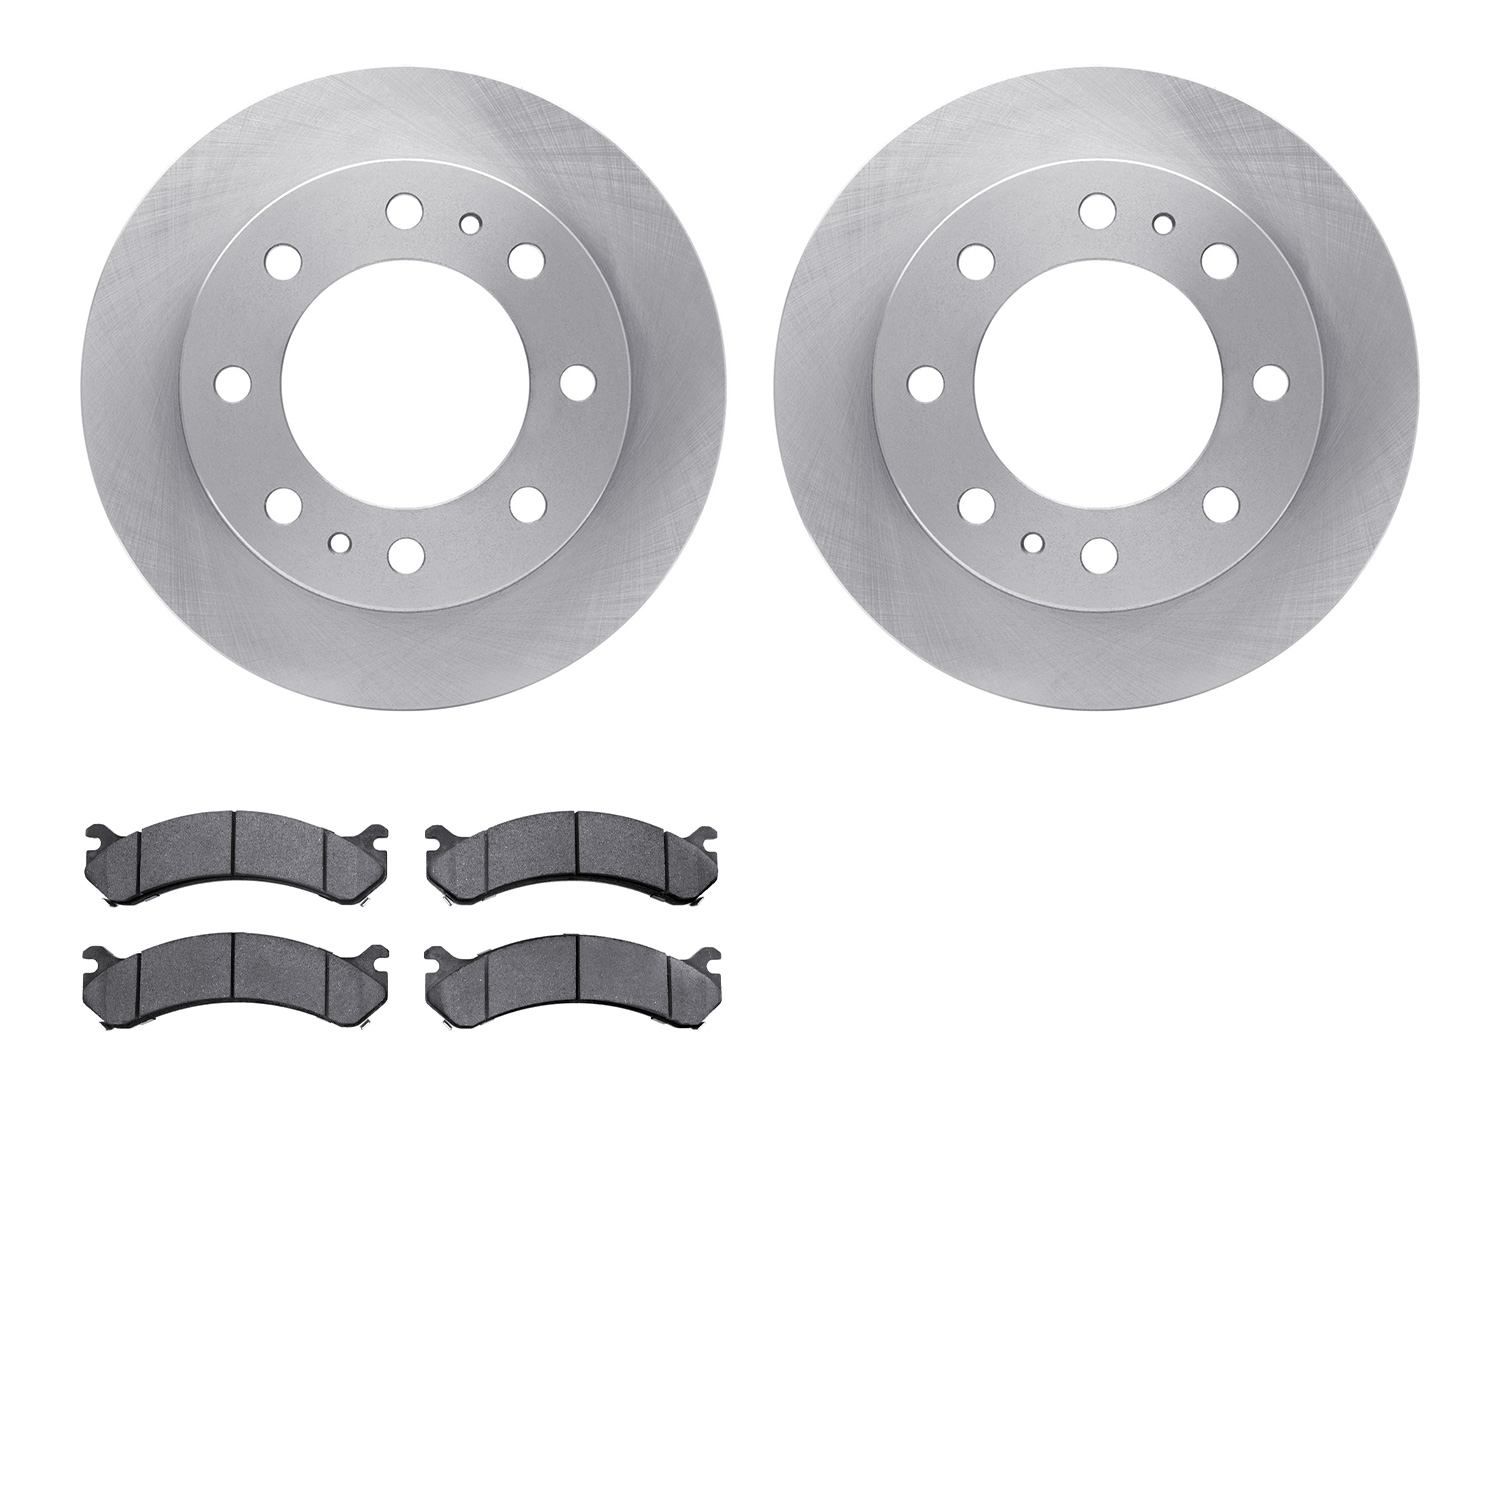 6402-48106 Brake Rotors with Ultimate-Duty Brake Pads, 2001-2020 GM, Position: Front